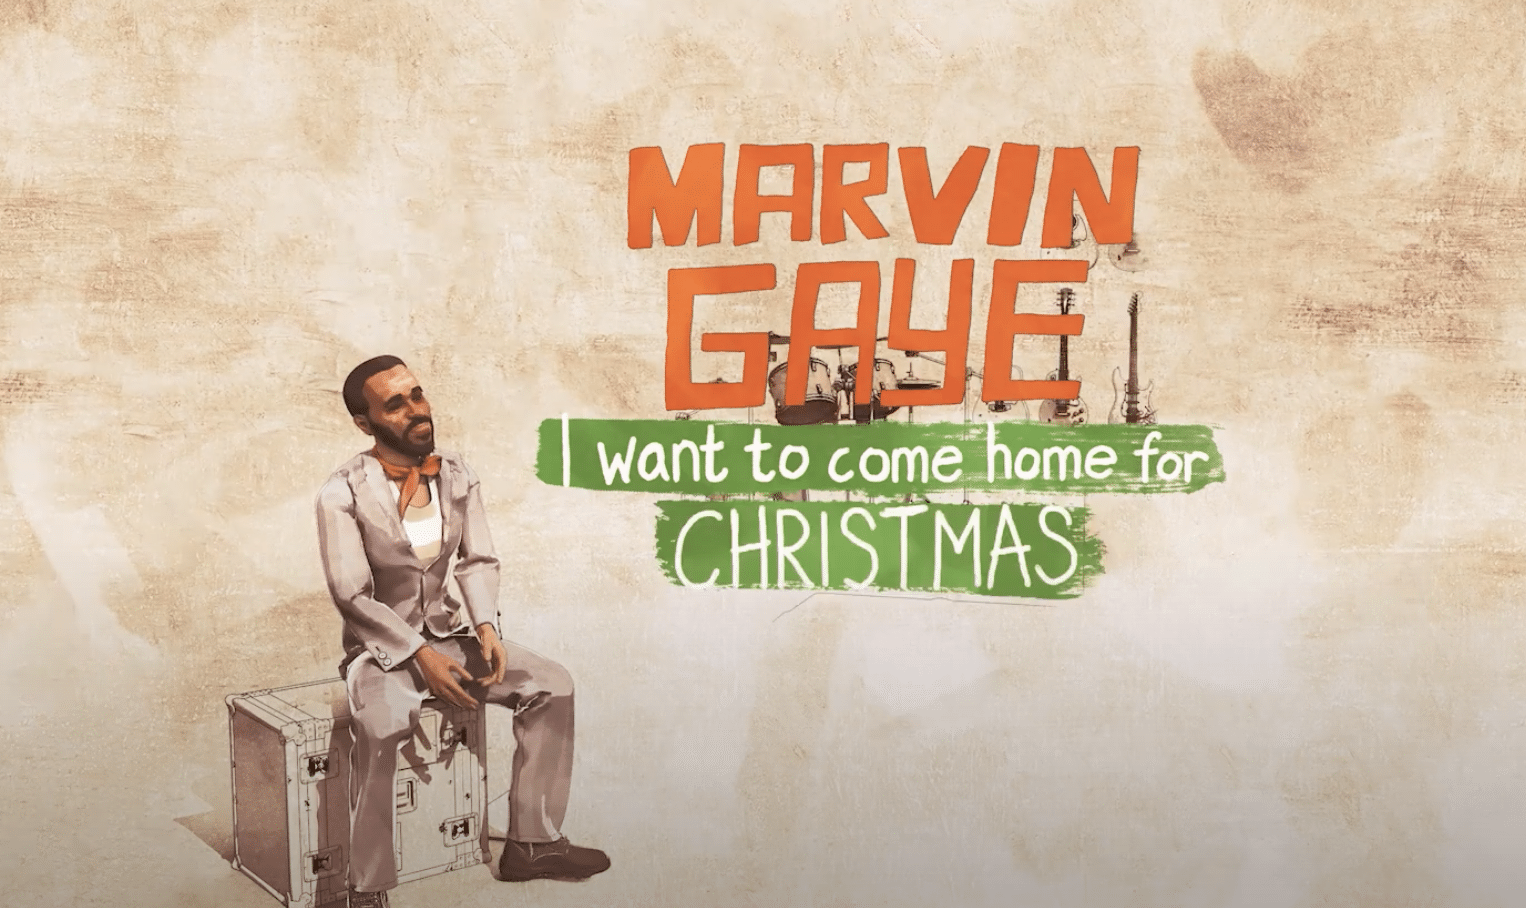 Best Christmas Songs - I Want to Come Home for Christmas